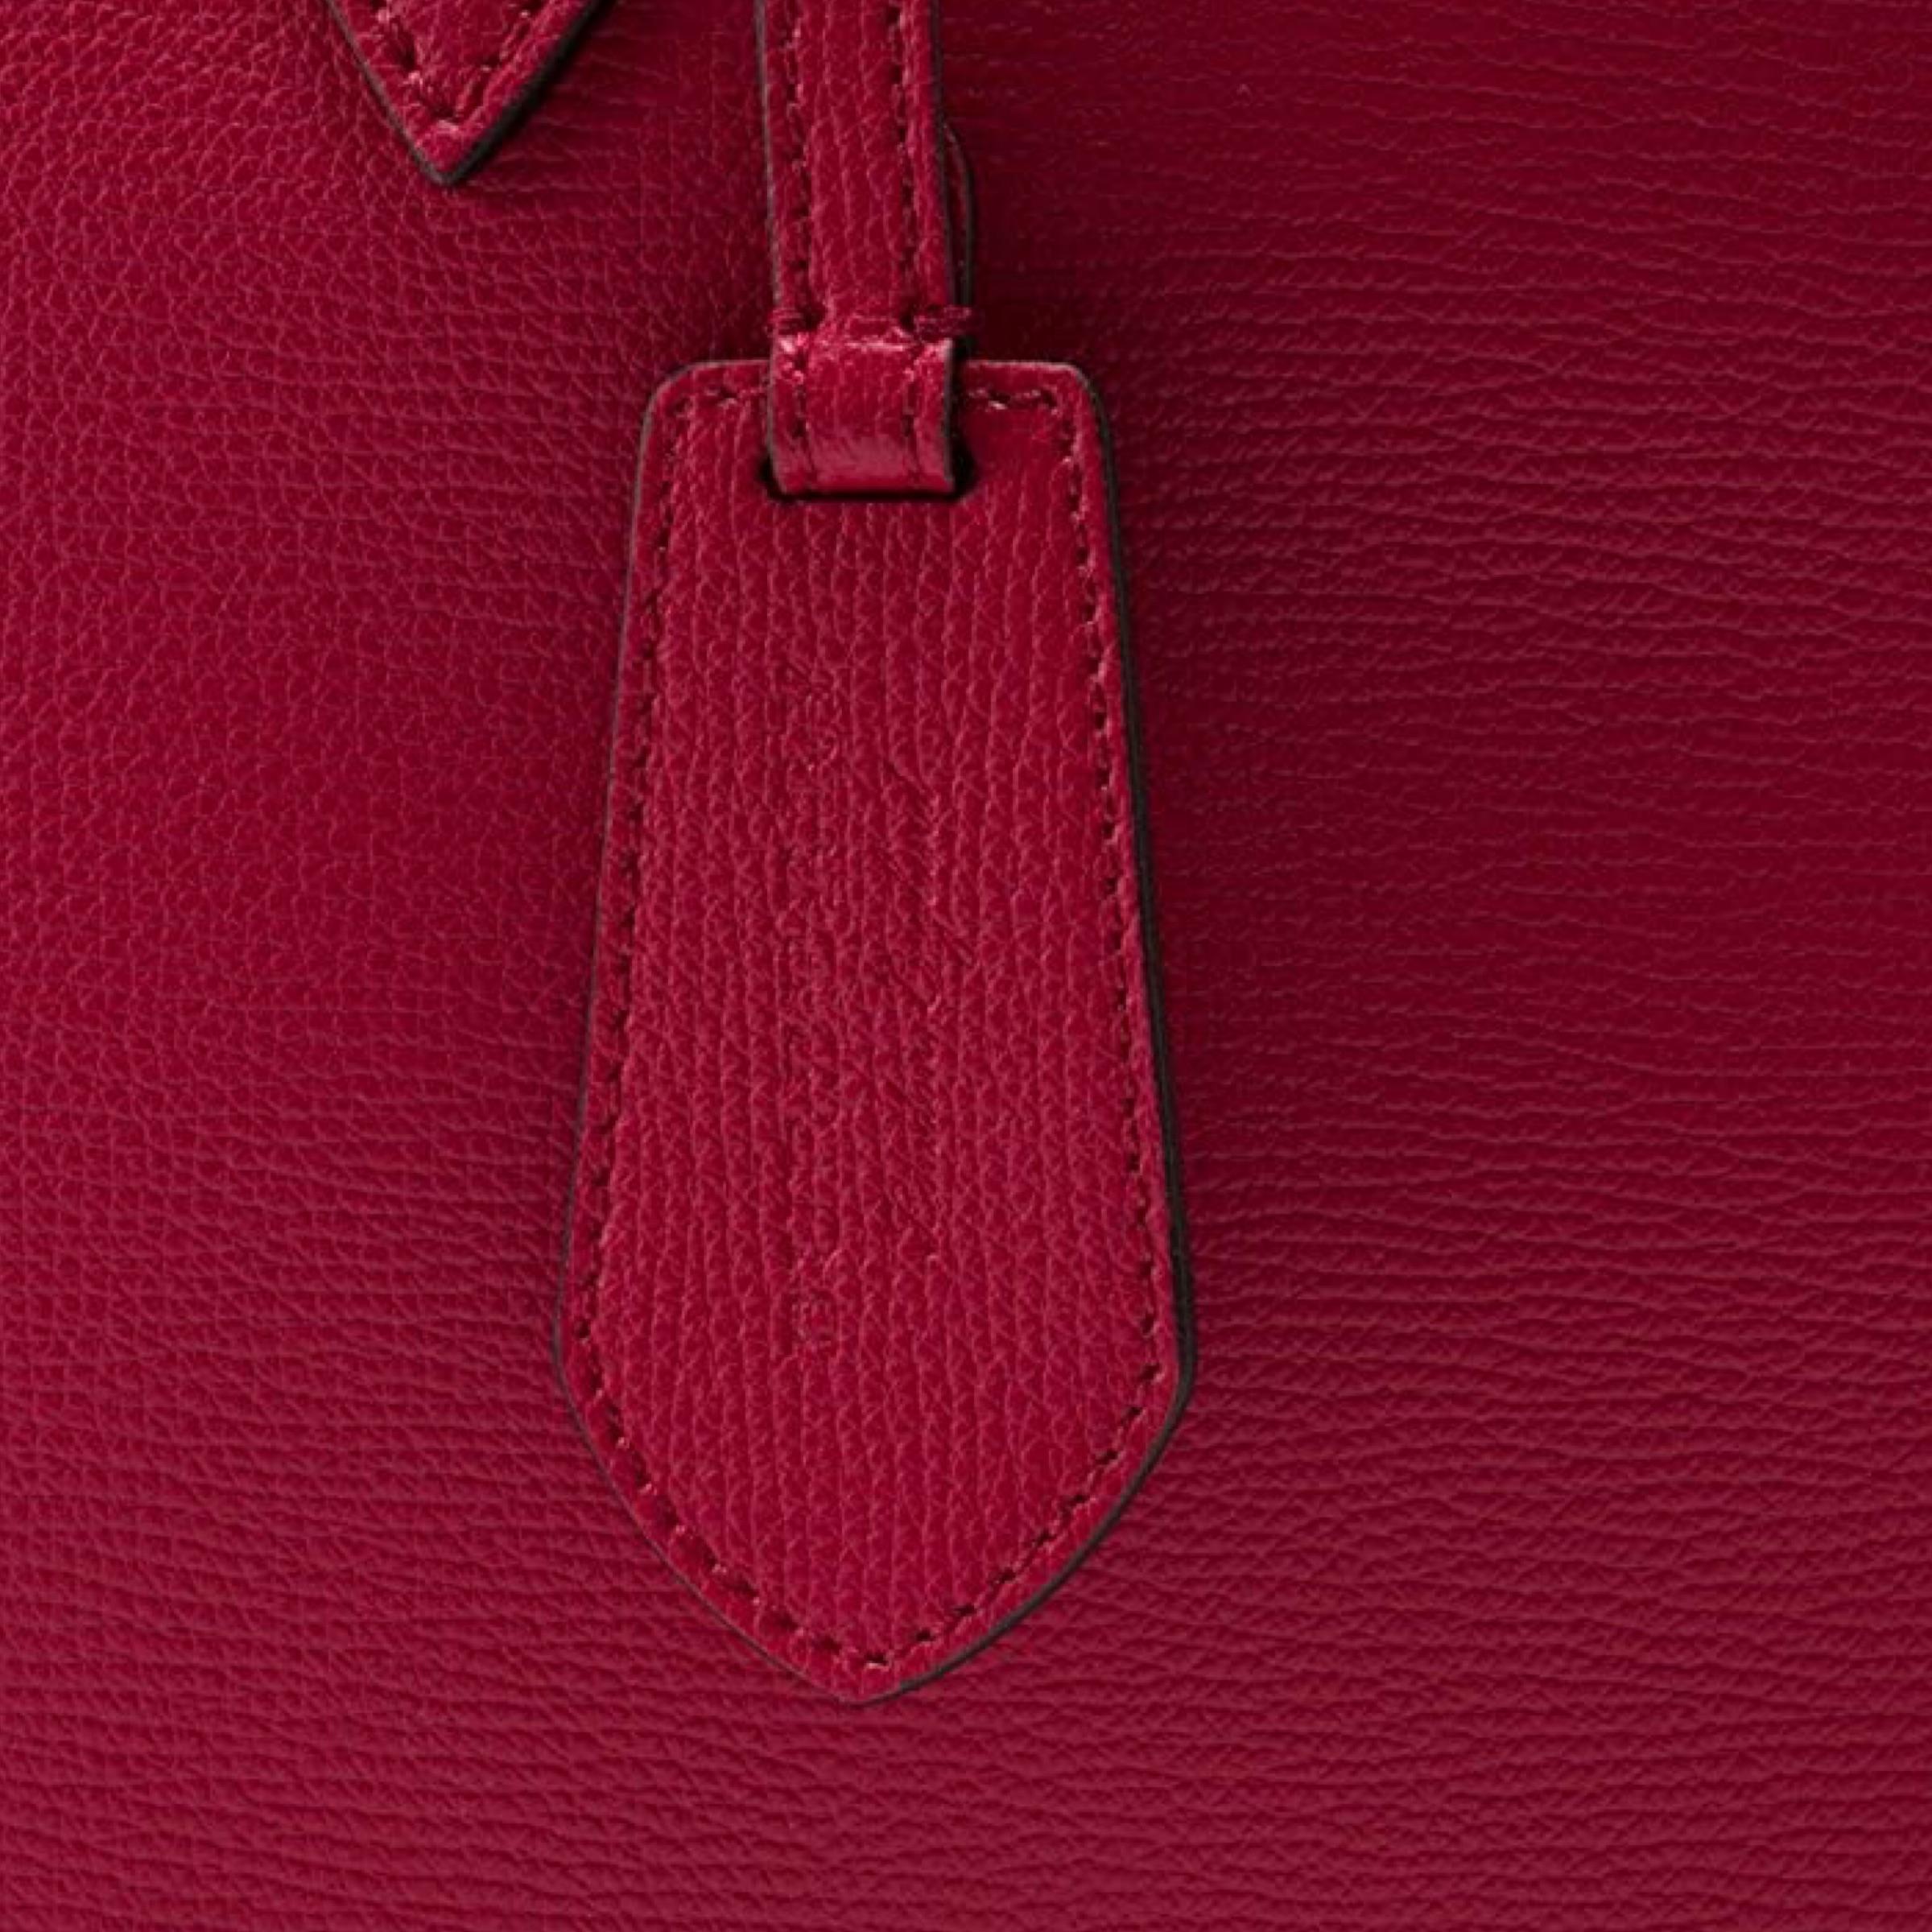 NEW Burberry Red Haymarket Check Reversible Leather Tote Shoulder Bag For Sale 2